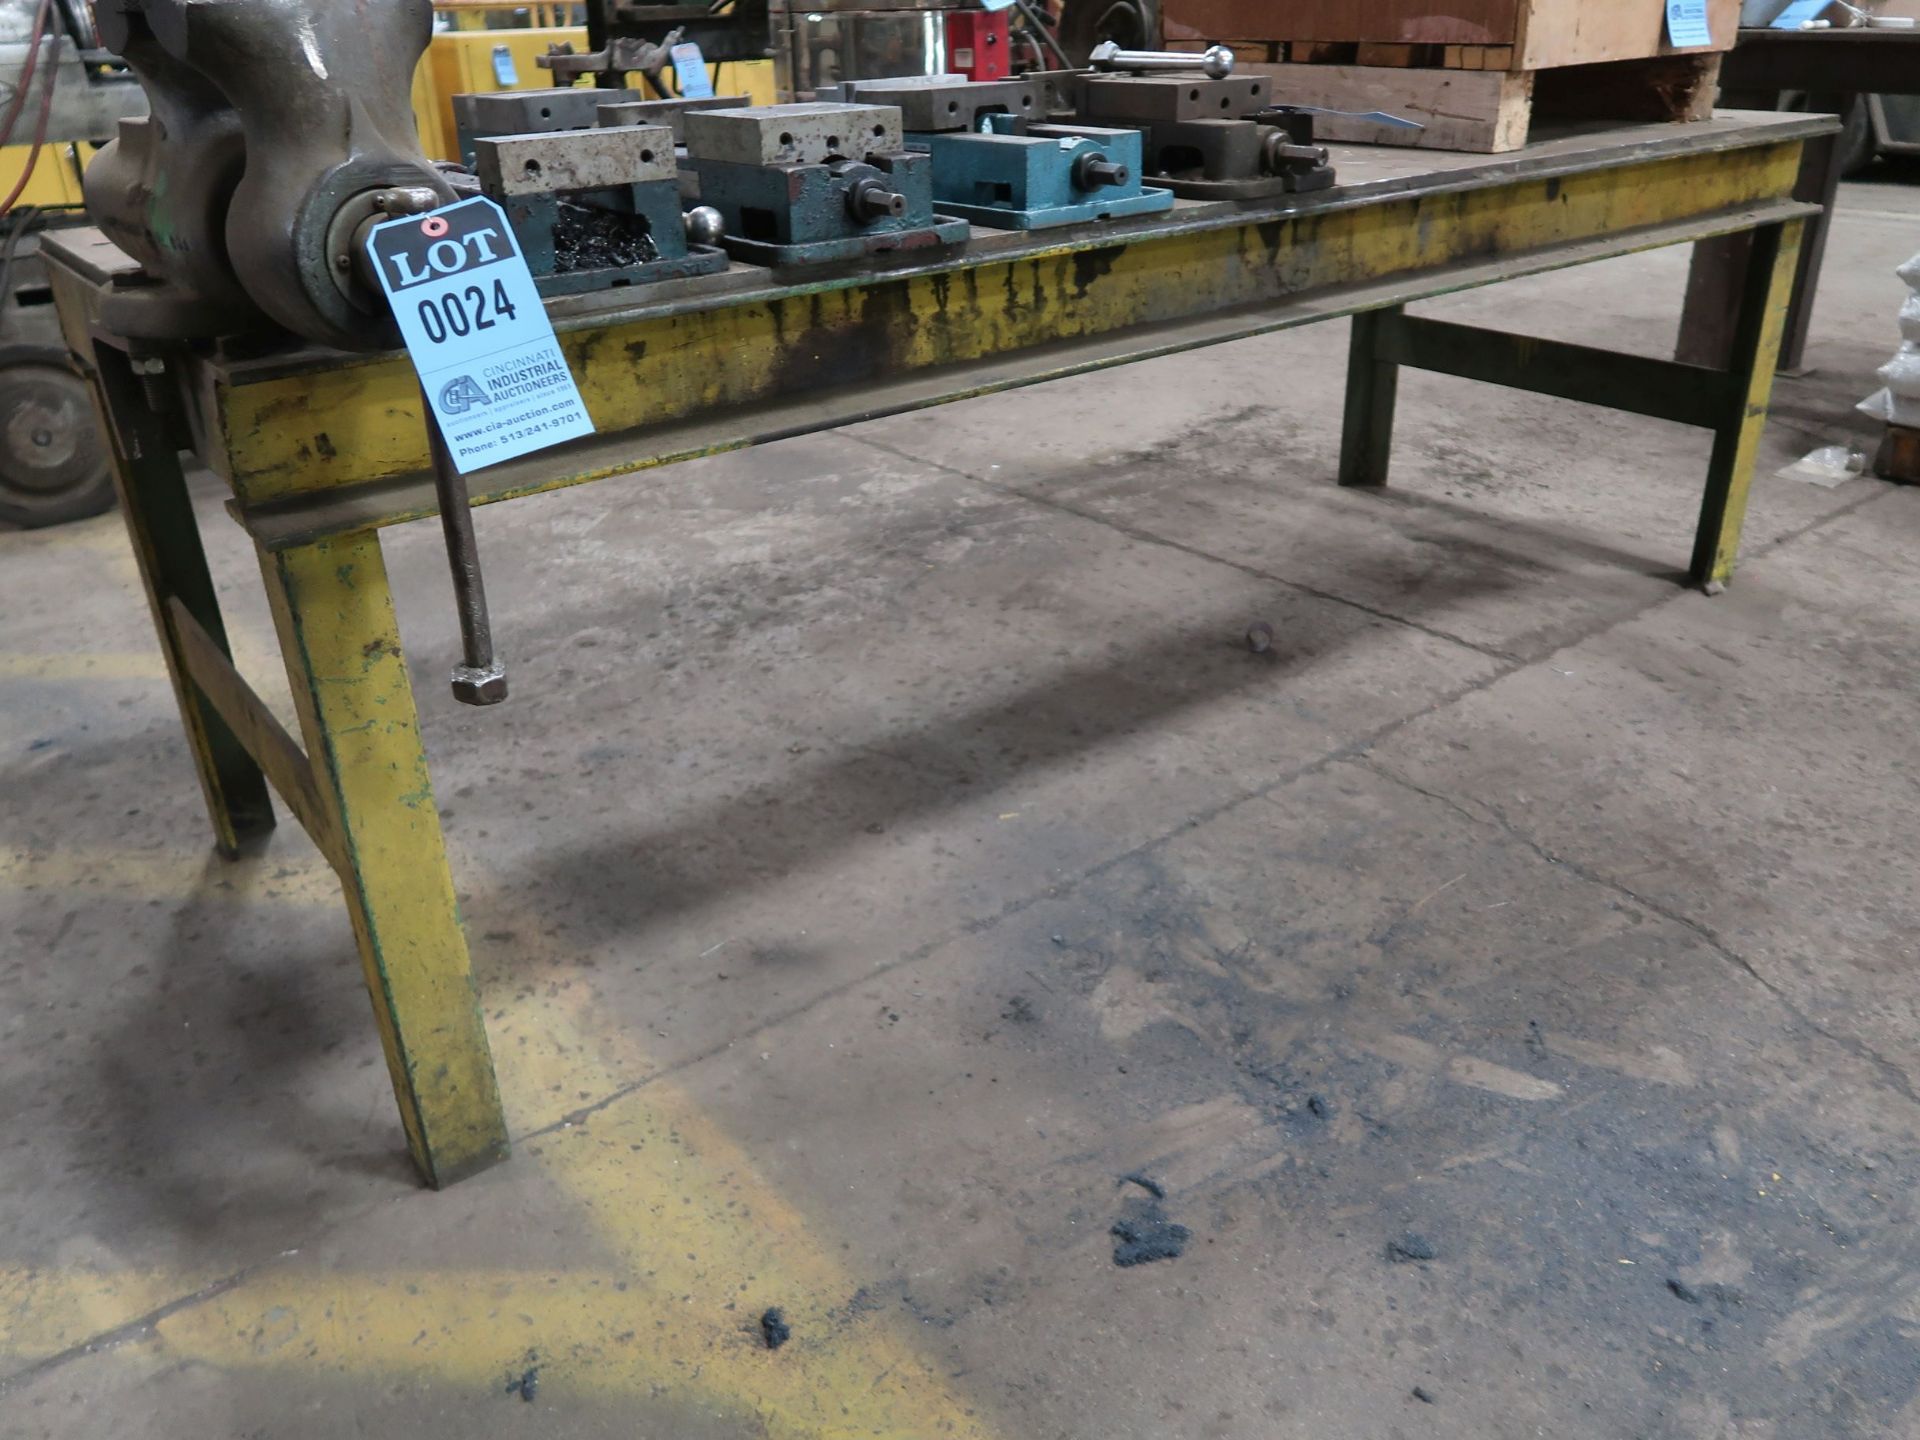 35" X 93" X 31" OVERHALL HEIGHT X 1/2" THICK STEEL TOP PLATE HEAVY DUTY STEEL FRAME BENCH